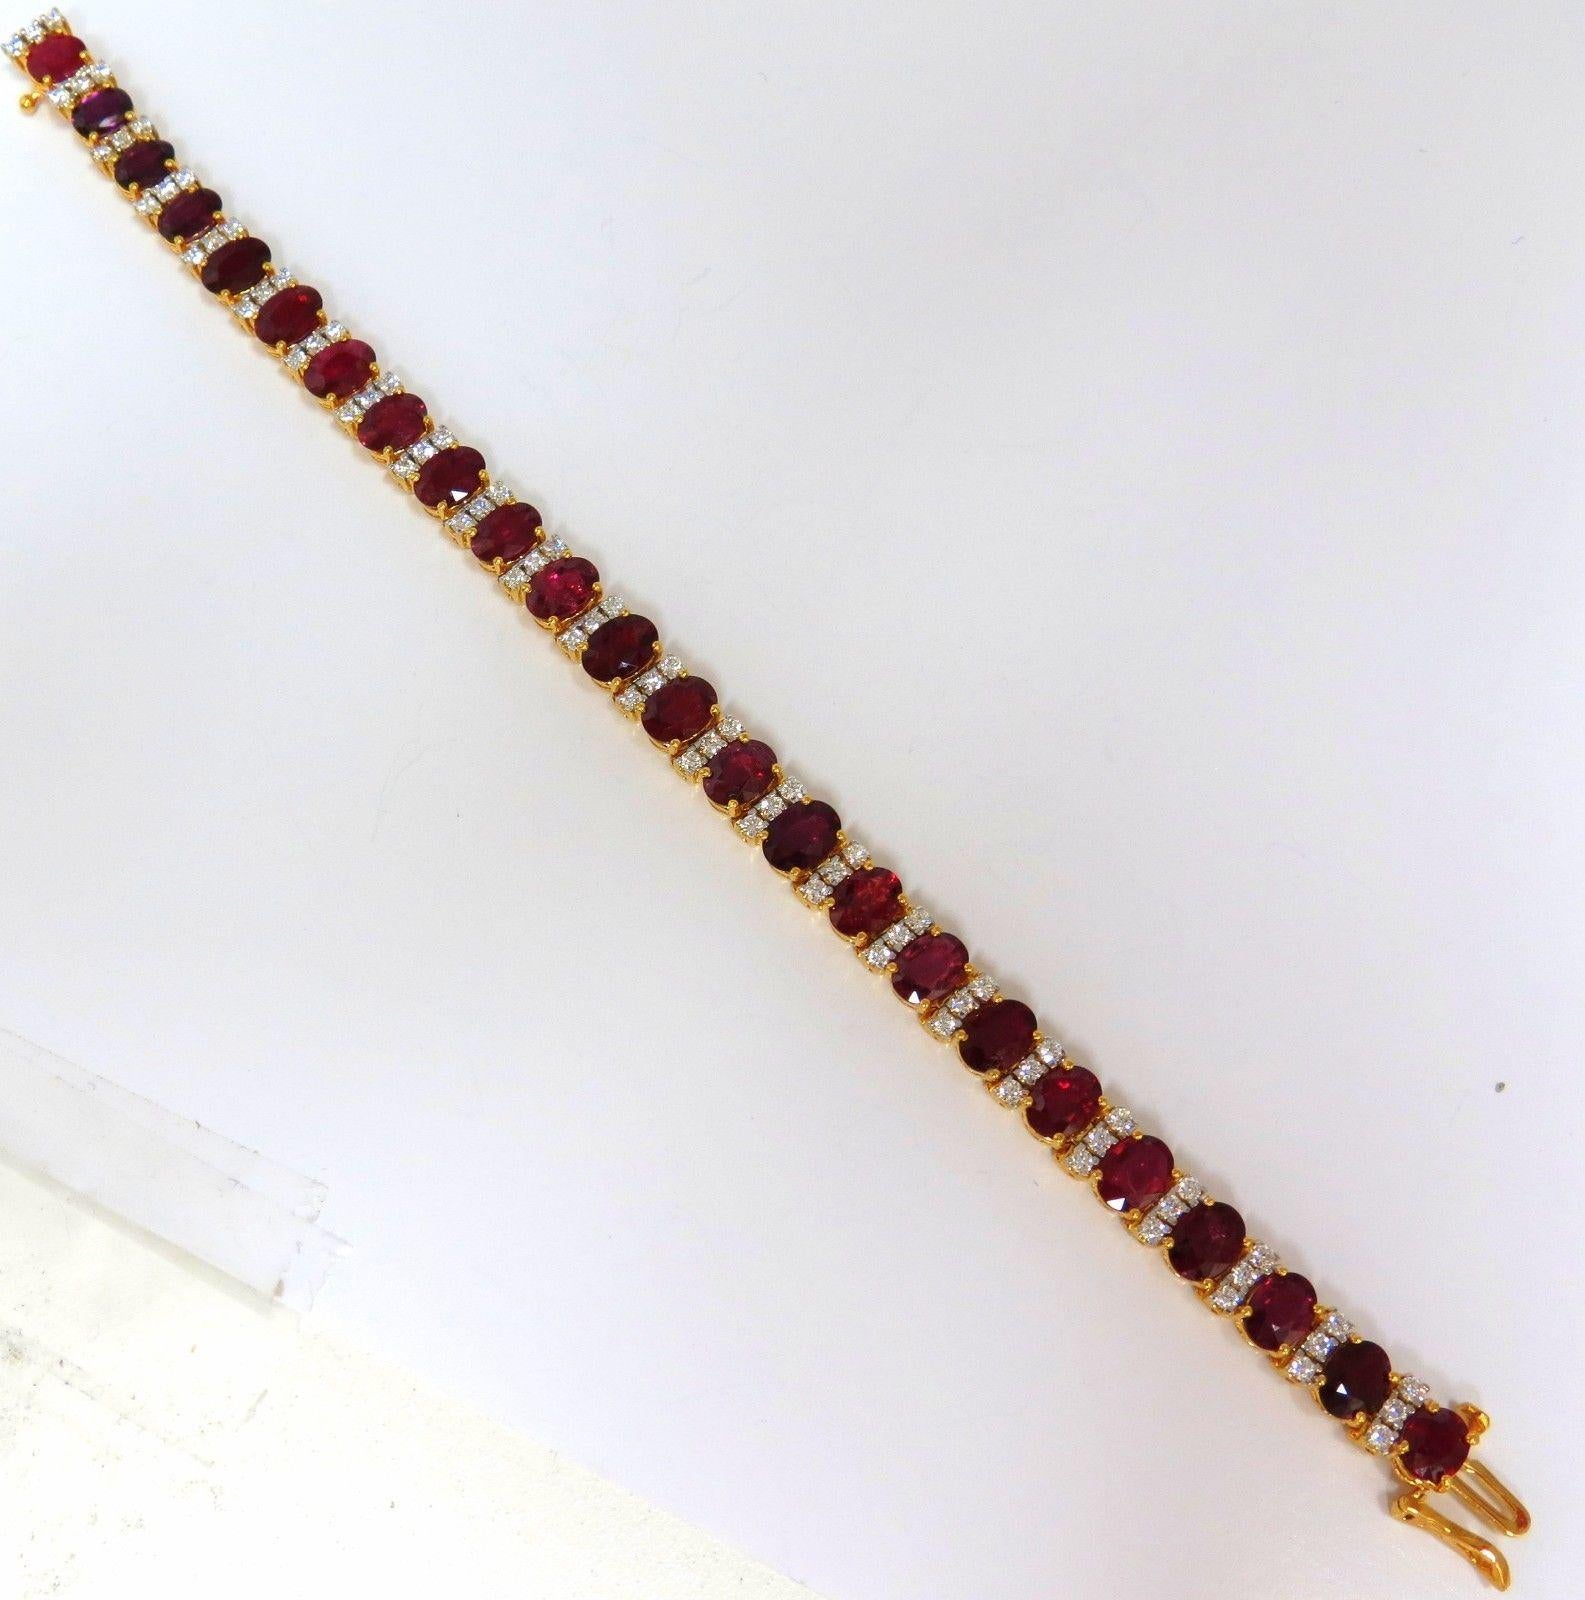 Classic Oval Tennis Bracelet  

19.80ct. Natural Ruby Tennis Bracelet

Red, Transparent & oval cut.

Mozambique origin

6.8 X 5.3mm - 5.5 X 4.5mm

Clean Clarity and very good cut.



2.05ct. diamonds:

Rounds, G color Vs-2 clarity.

14kt. yellow